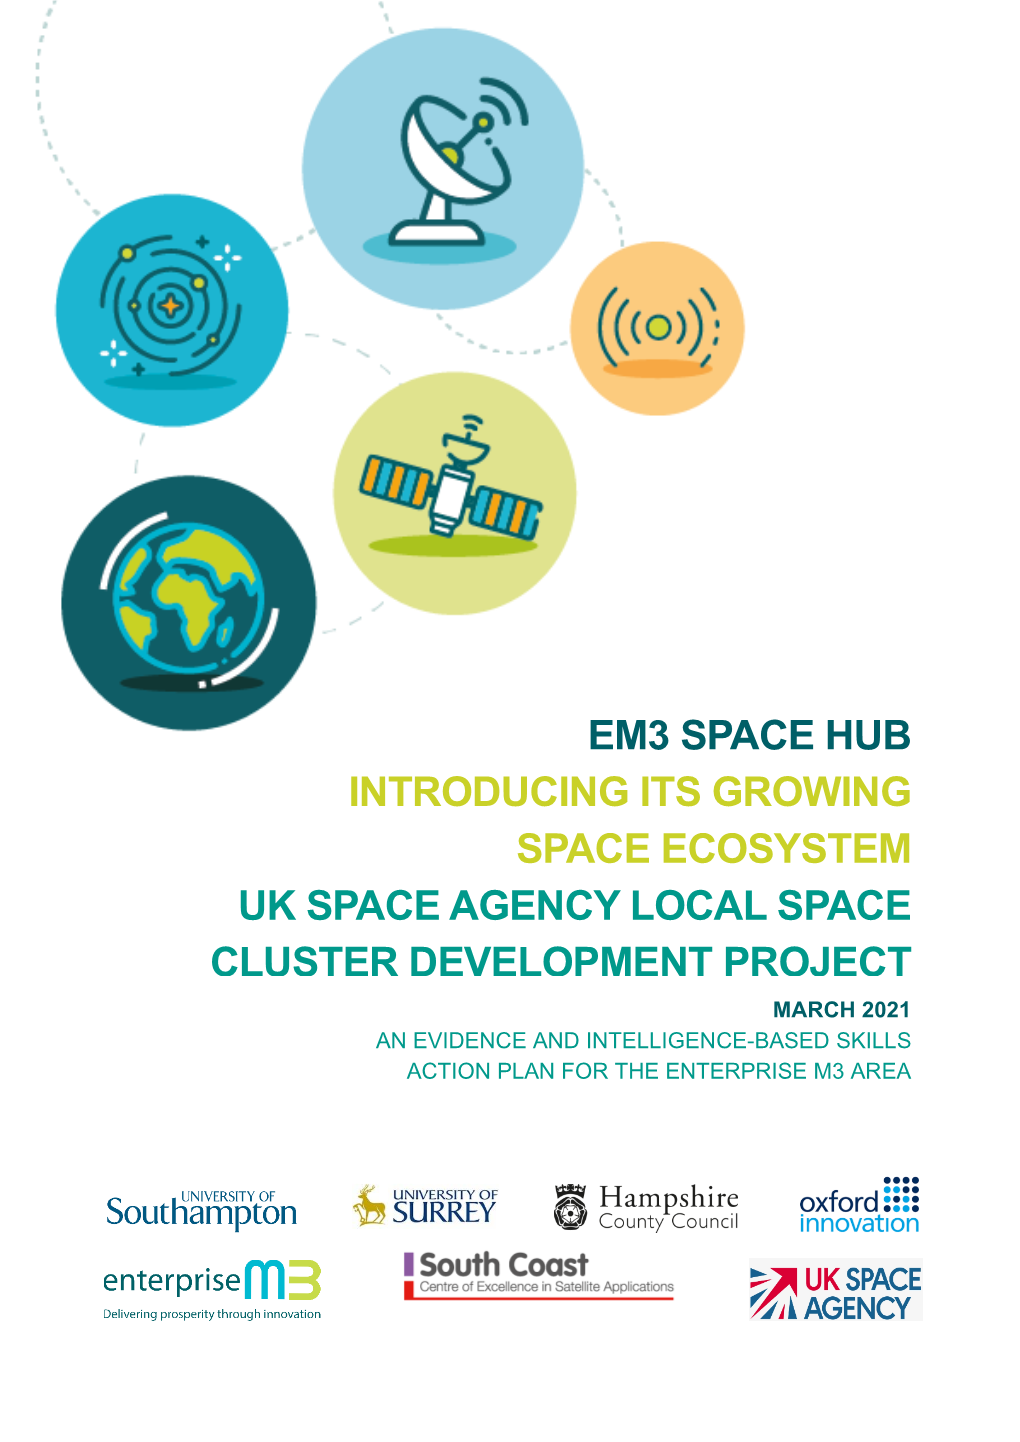 The EM3 Space Cluster Development Project